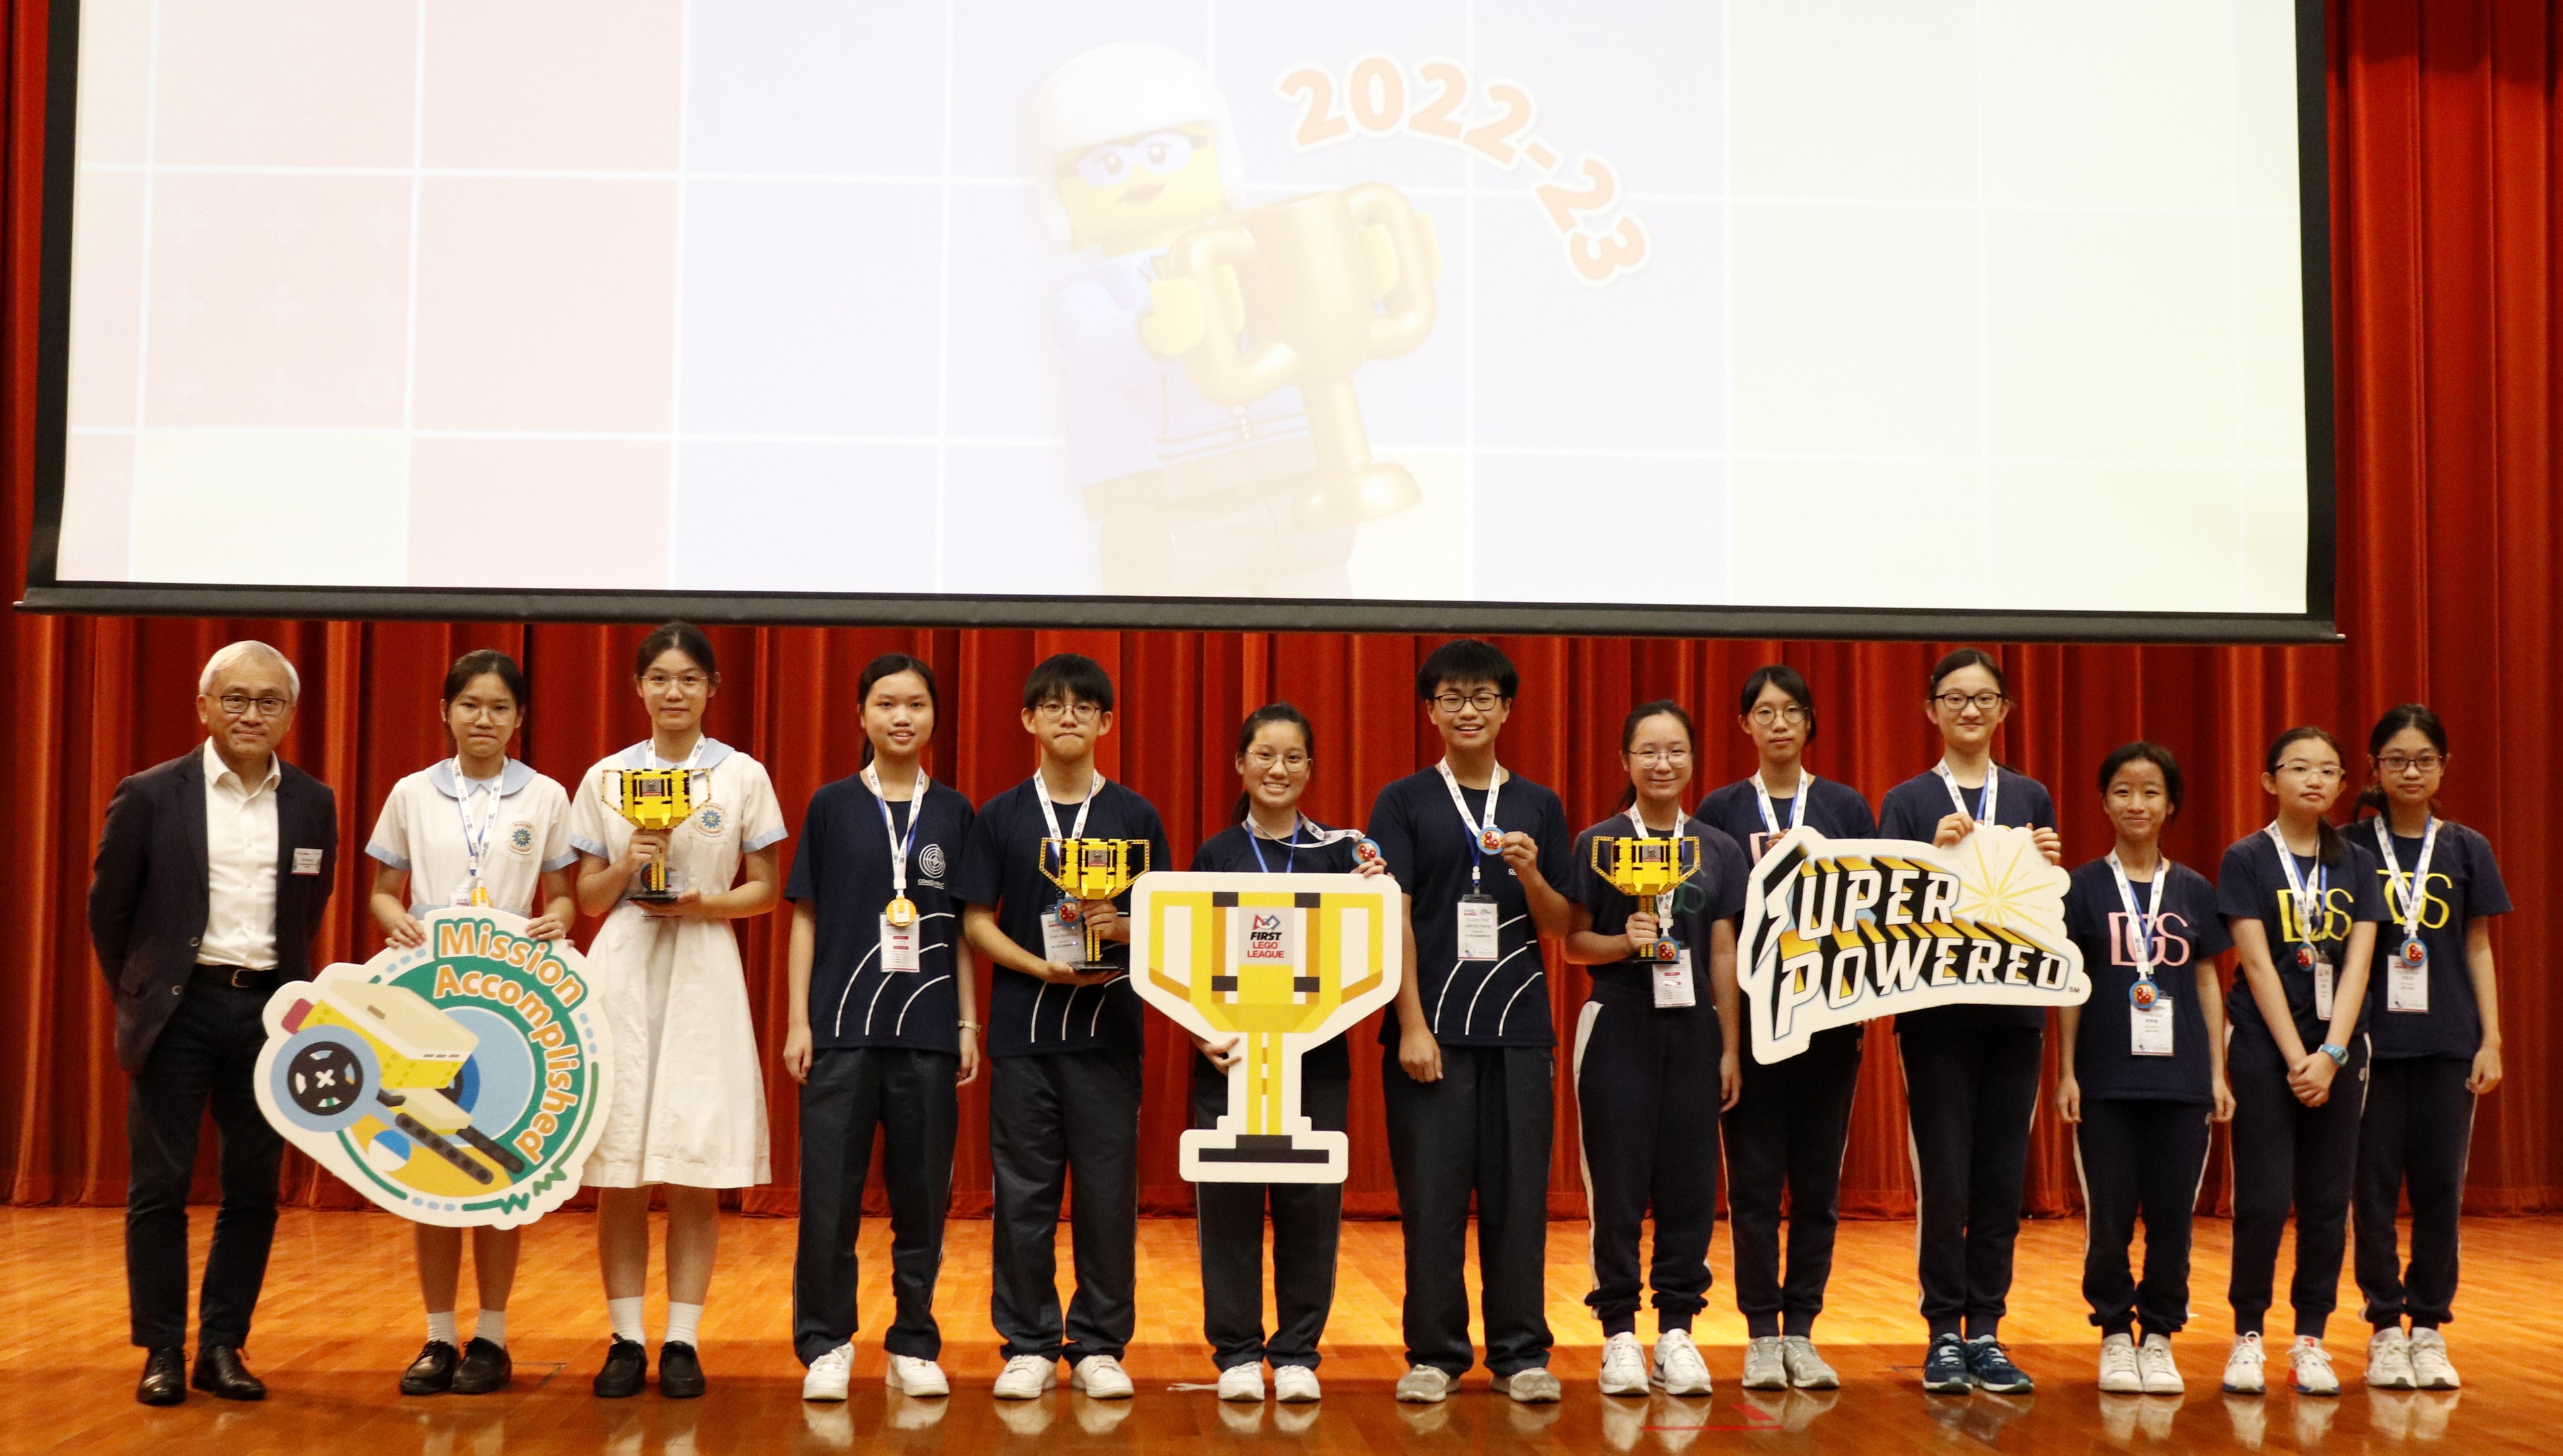 Award winners of the FIRST® LEGO® League 2022-23 Secondary School Division.